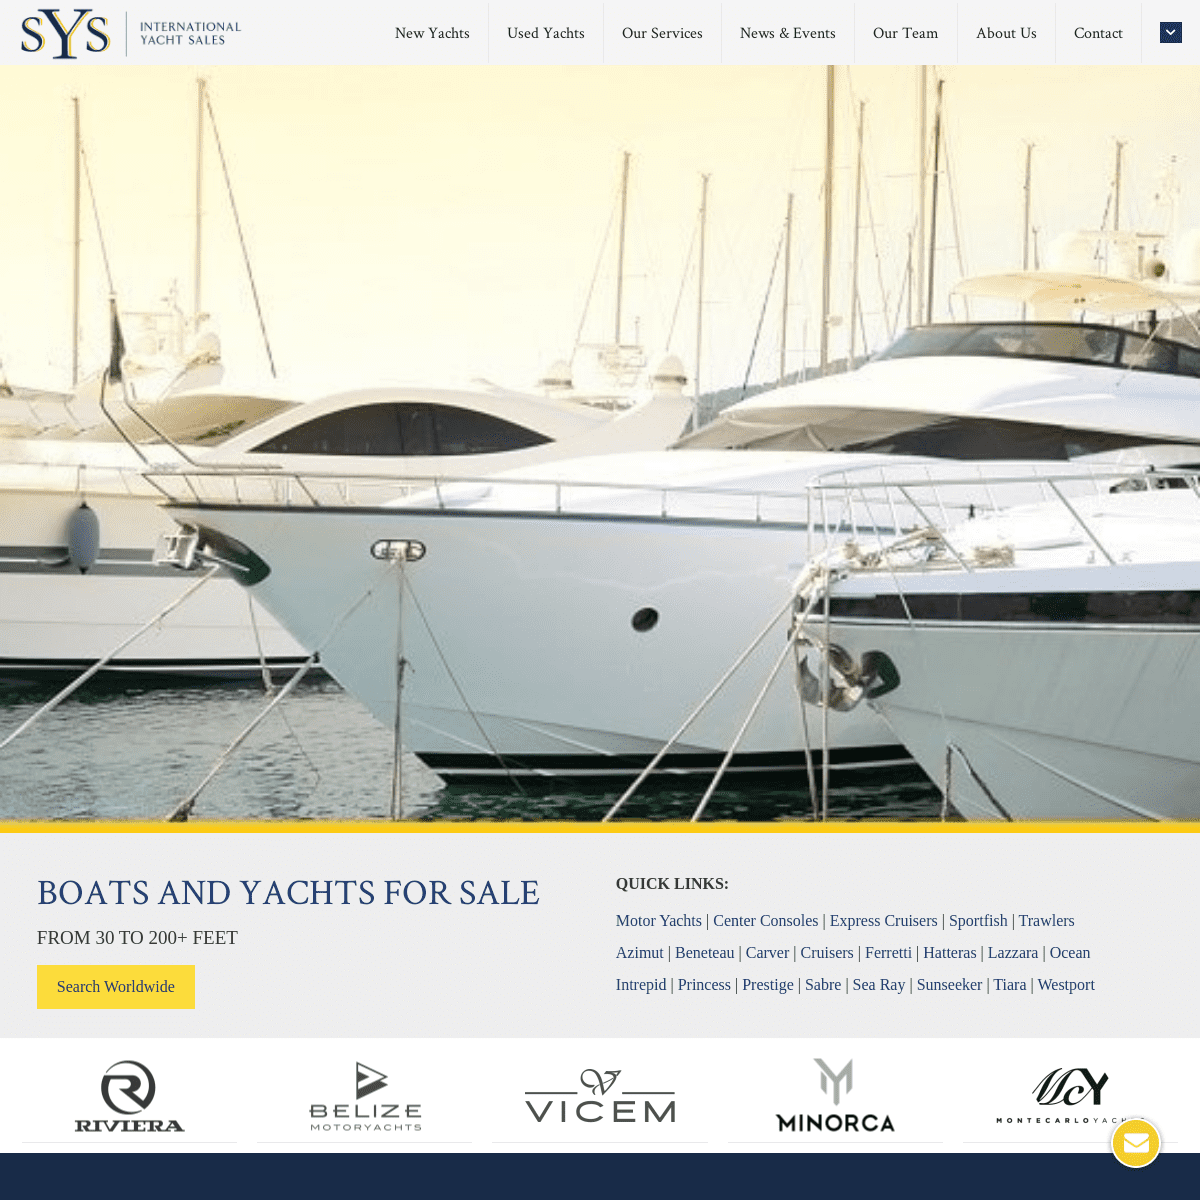 A complete backup of sysyachtsales.com